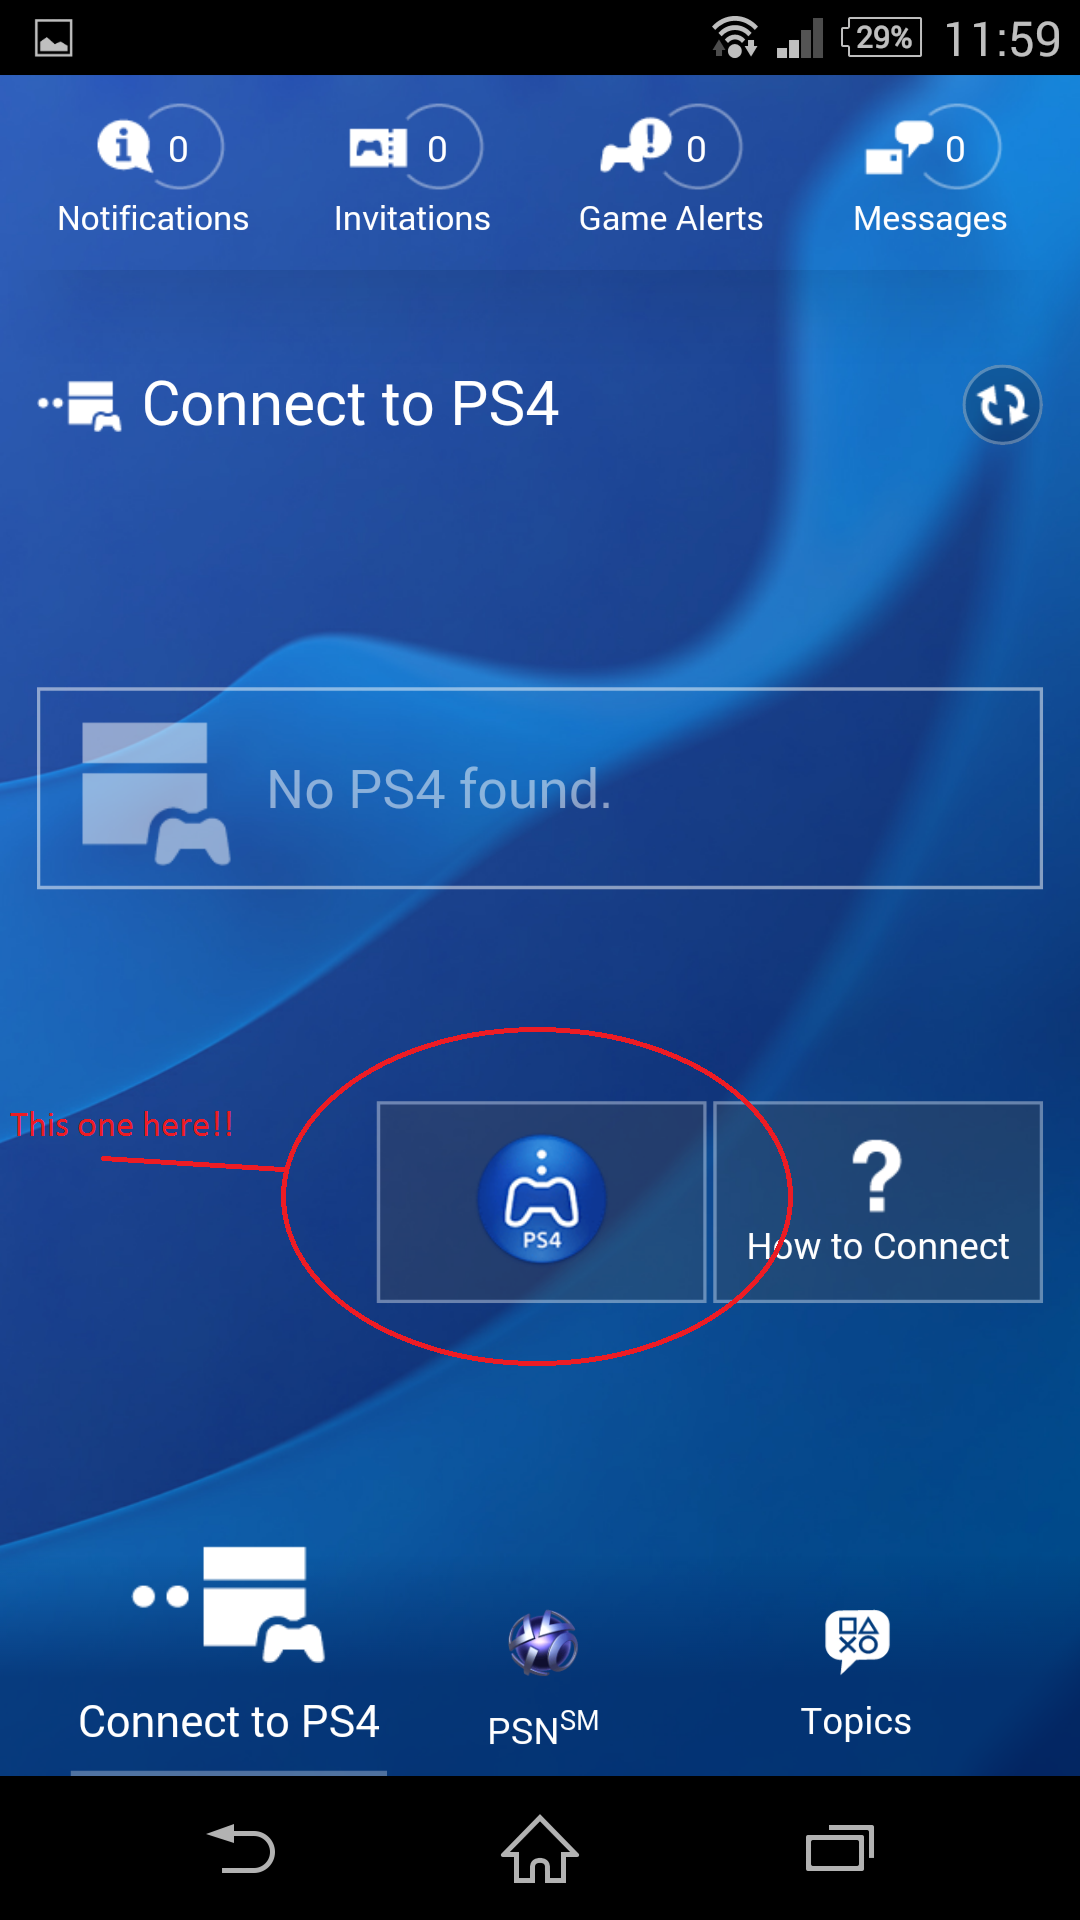 hensigt Rettelse Scene Install Xperia Z3 PS4 Remote Play Port on Android 4.0+ Xperia devices